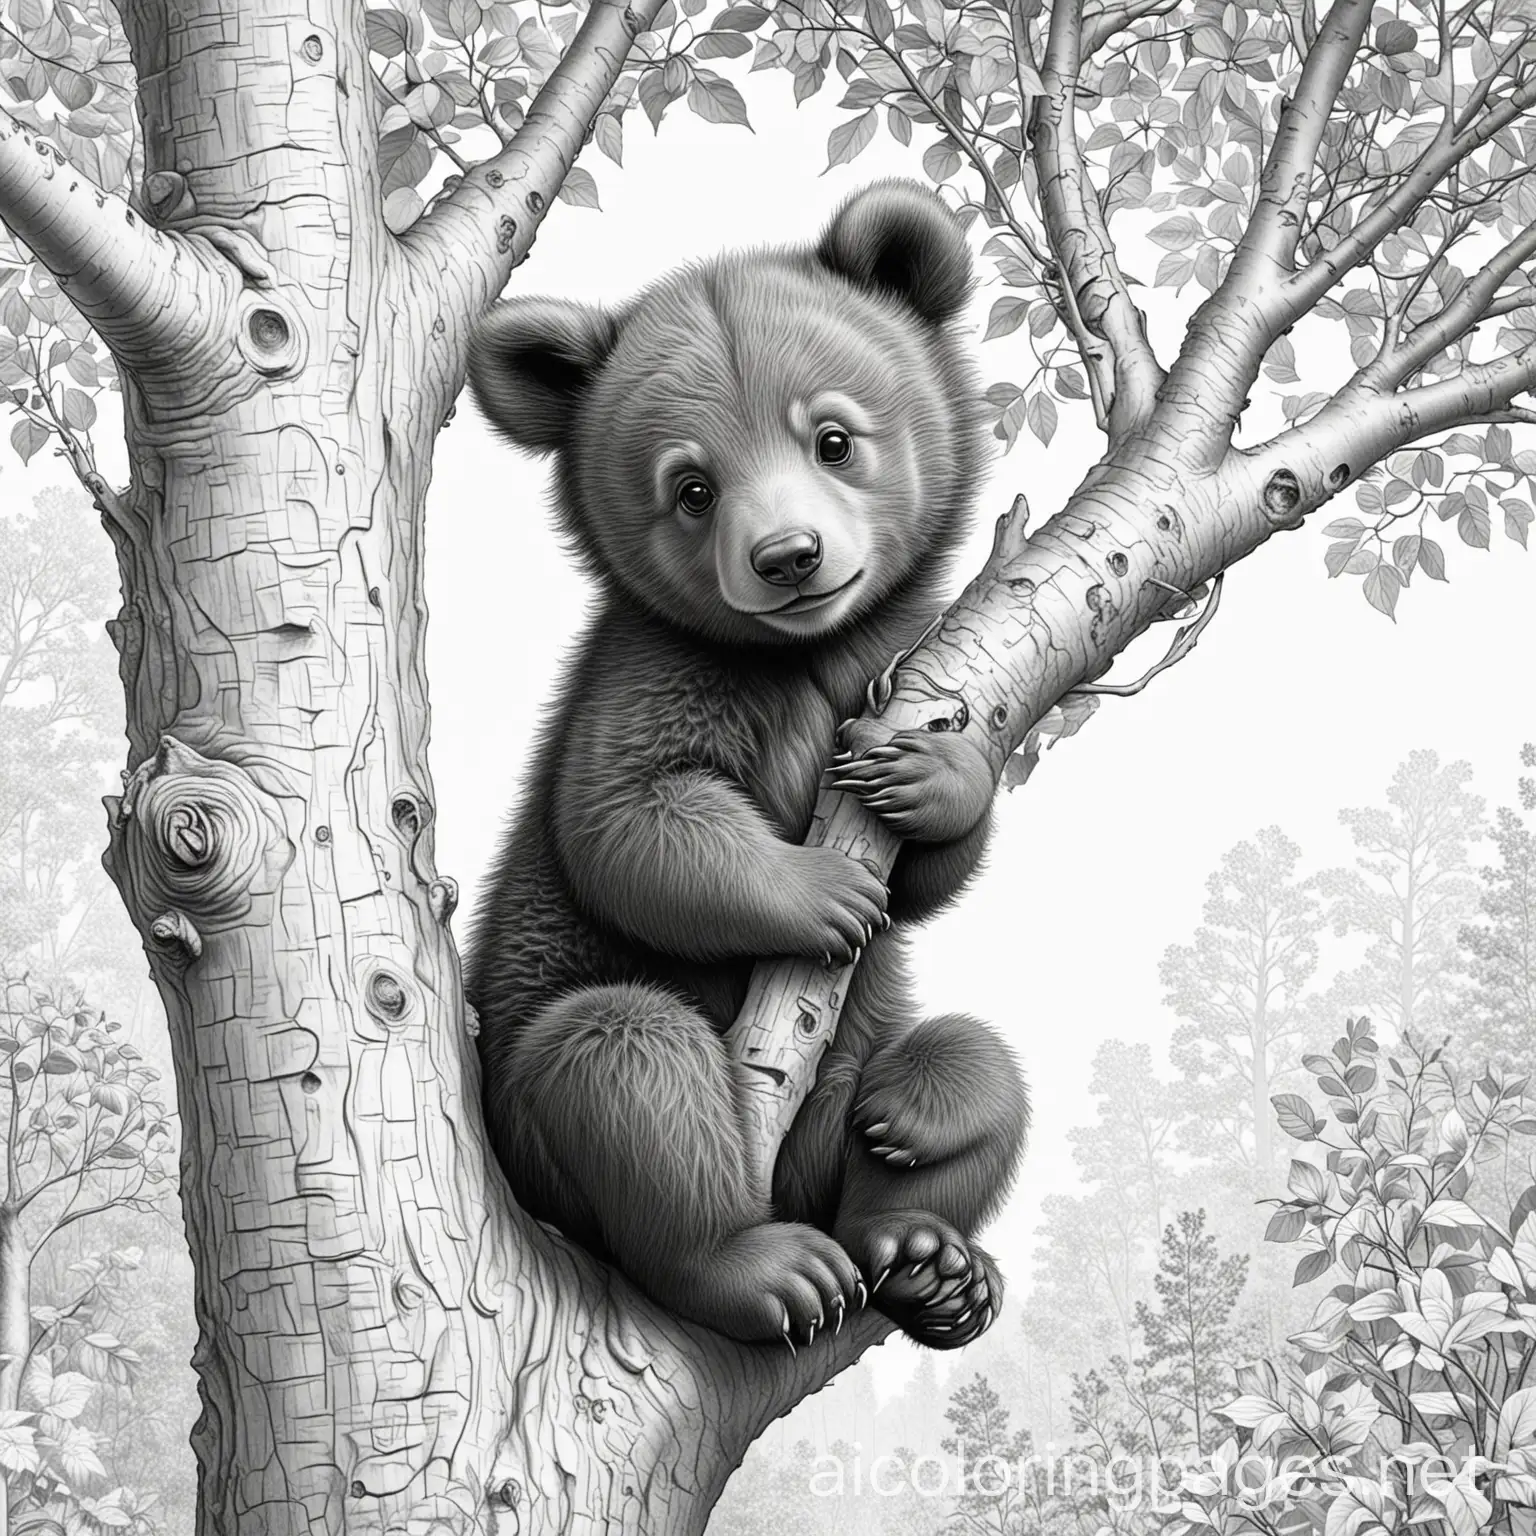 Bear cub climbing tree, Coloring Page, black and white, line art, white background, Simplicity, Ample White Space. The background of the coloring page is plain white to make it easy for young children to color within the lines. The outlines of all the subjects are easy to distinguish, making it simple for kids to color without too much difficulty